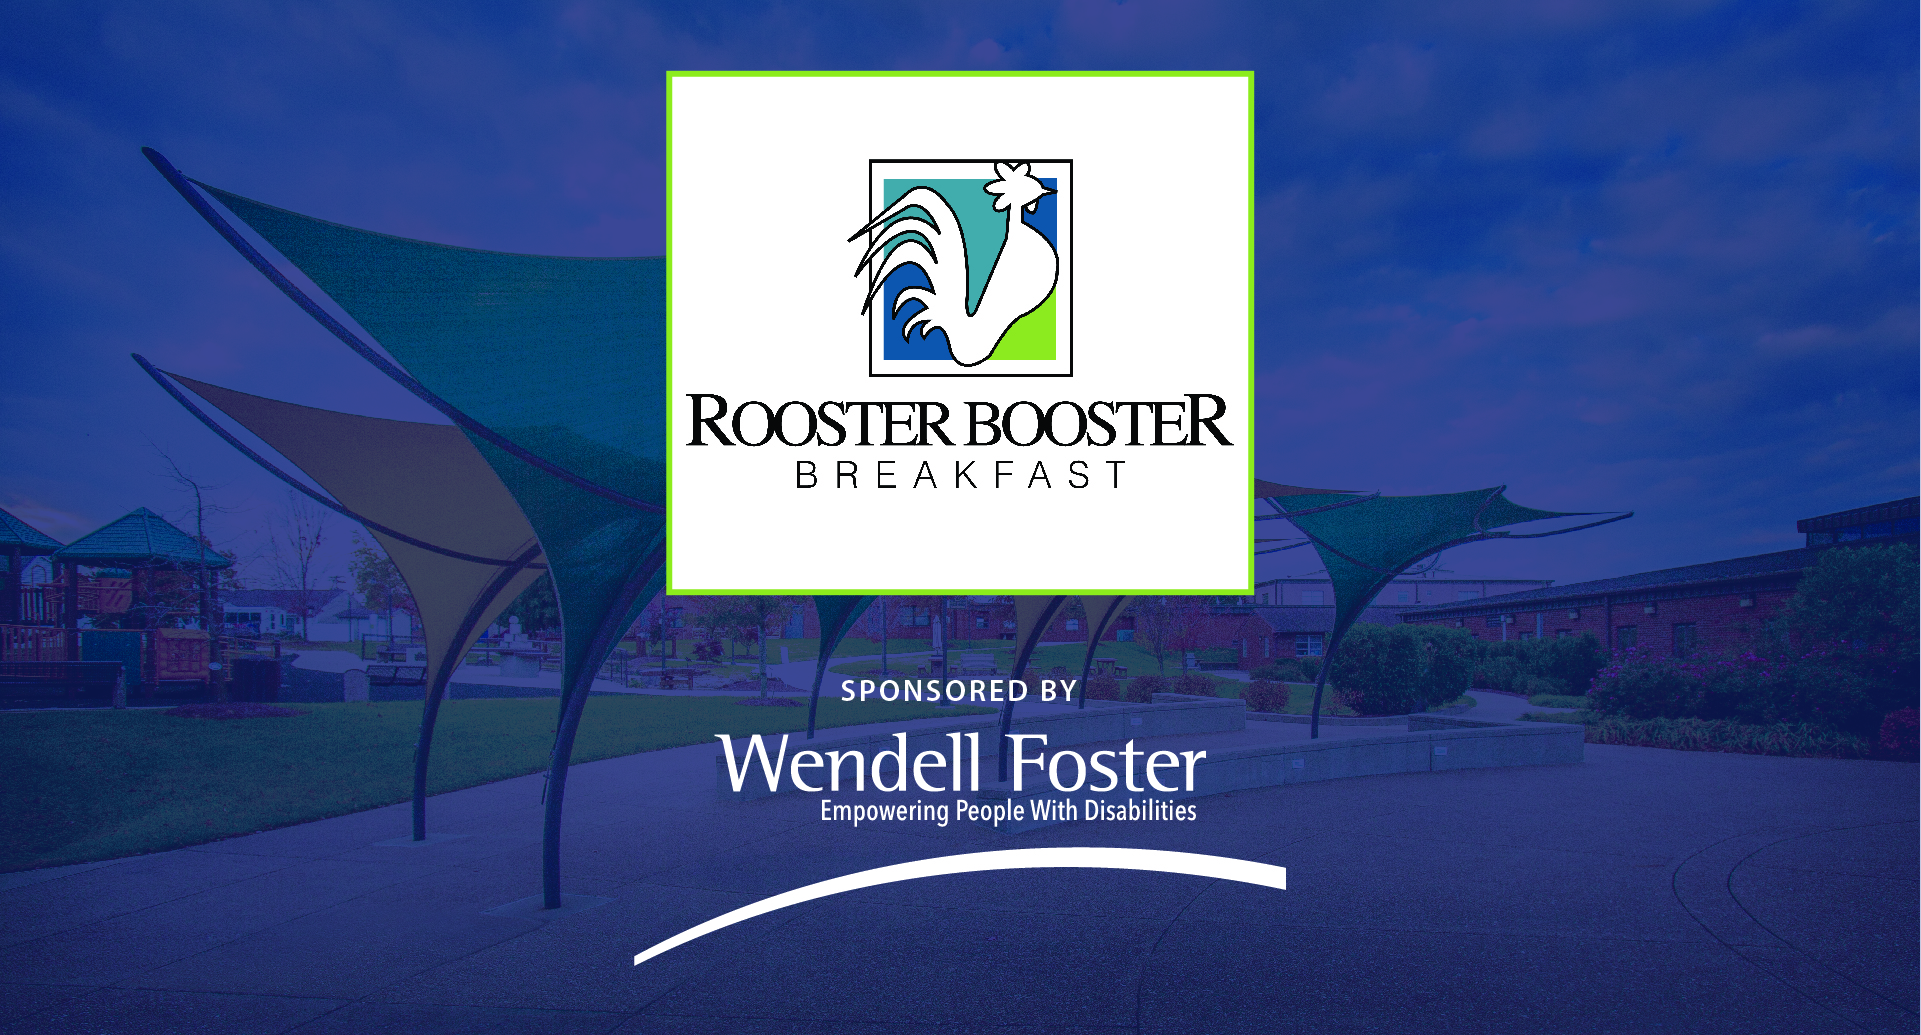 Rooster Booster sponsored by Wendell Foster